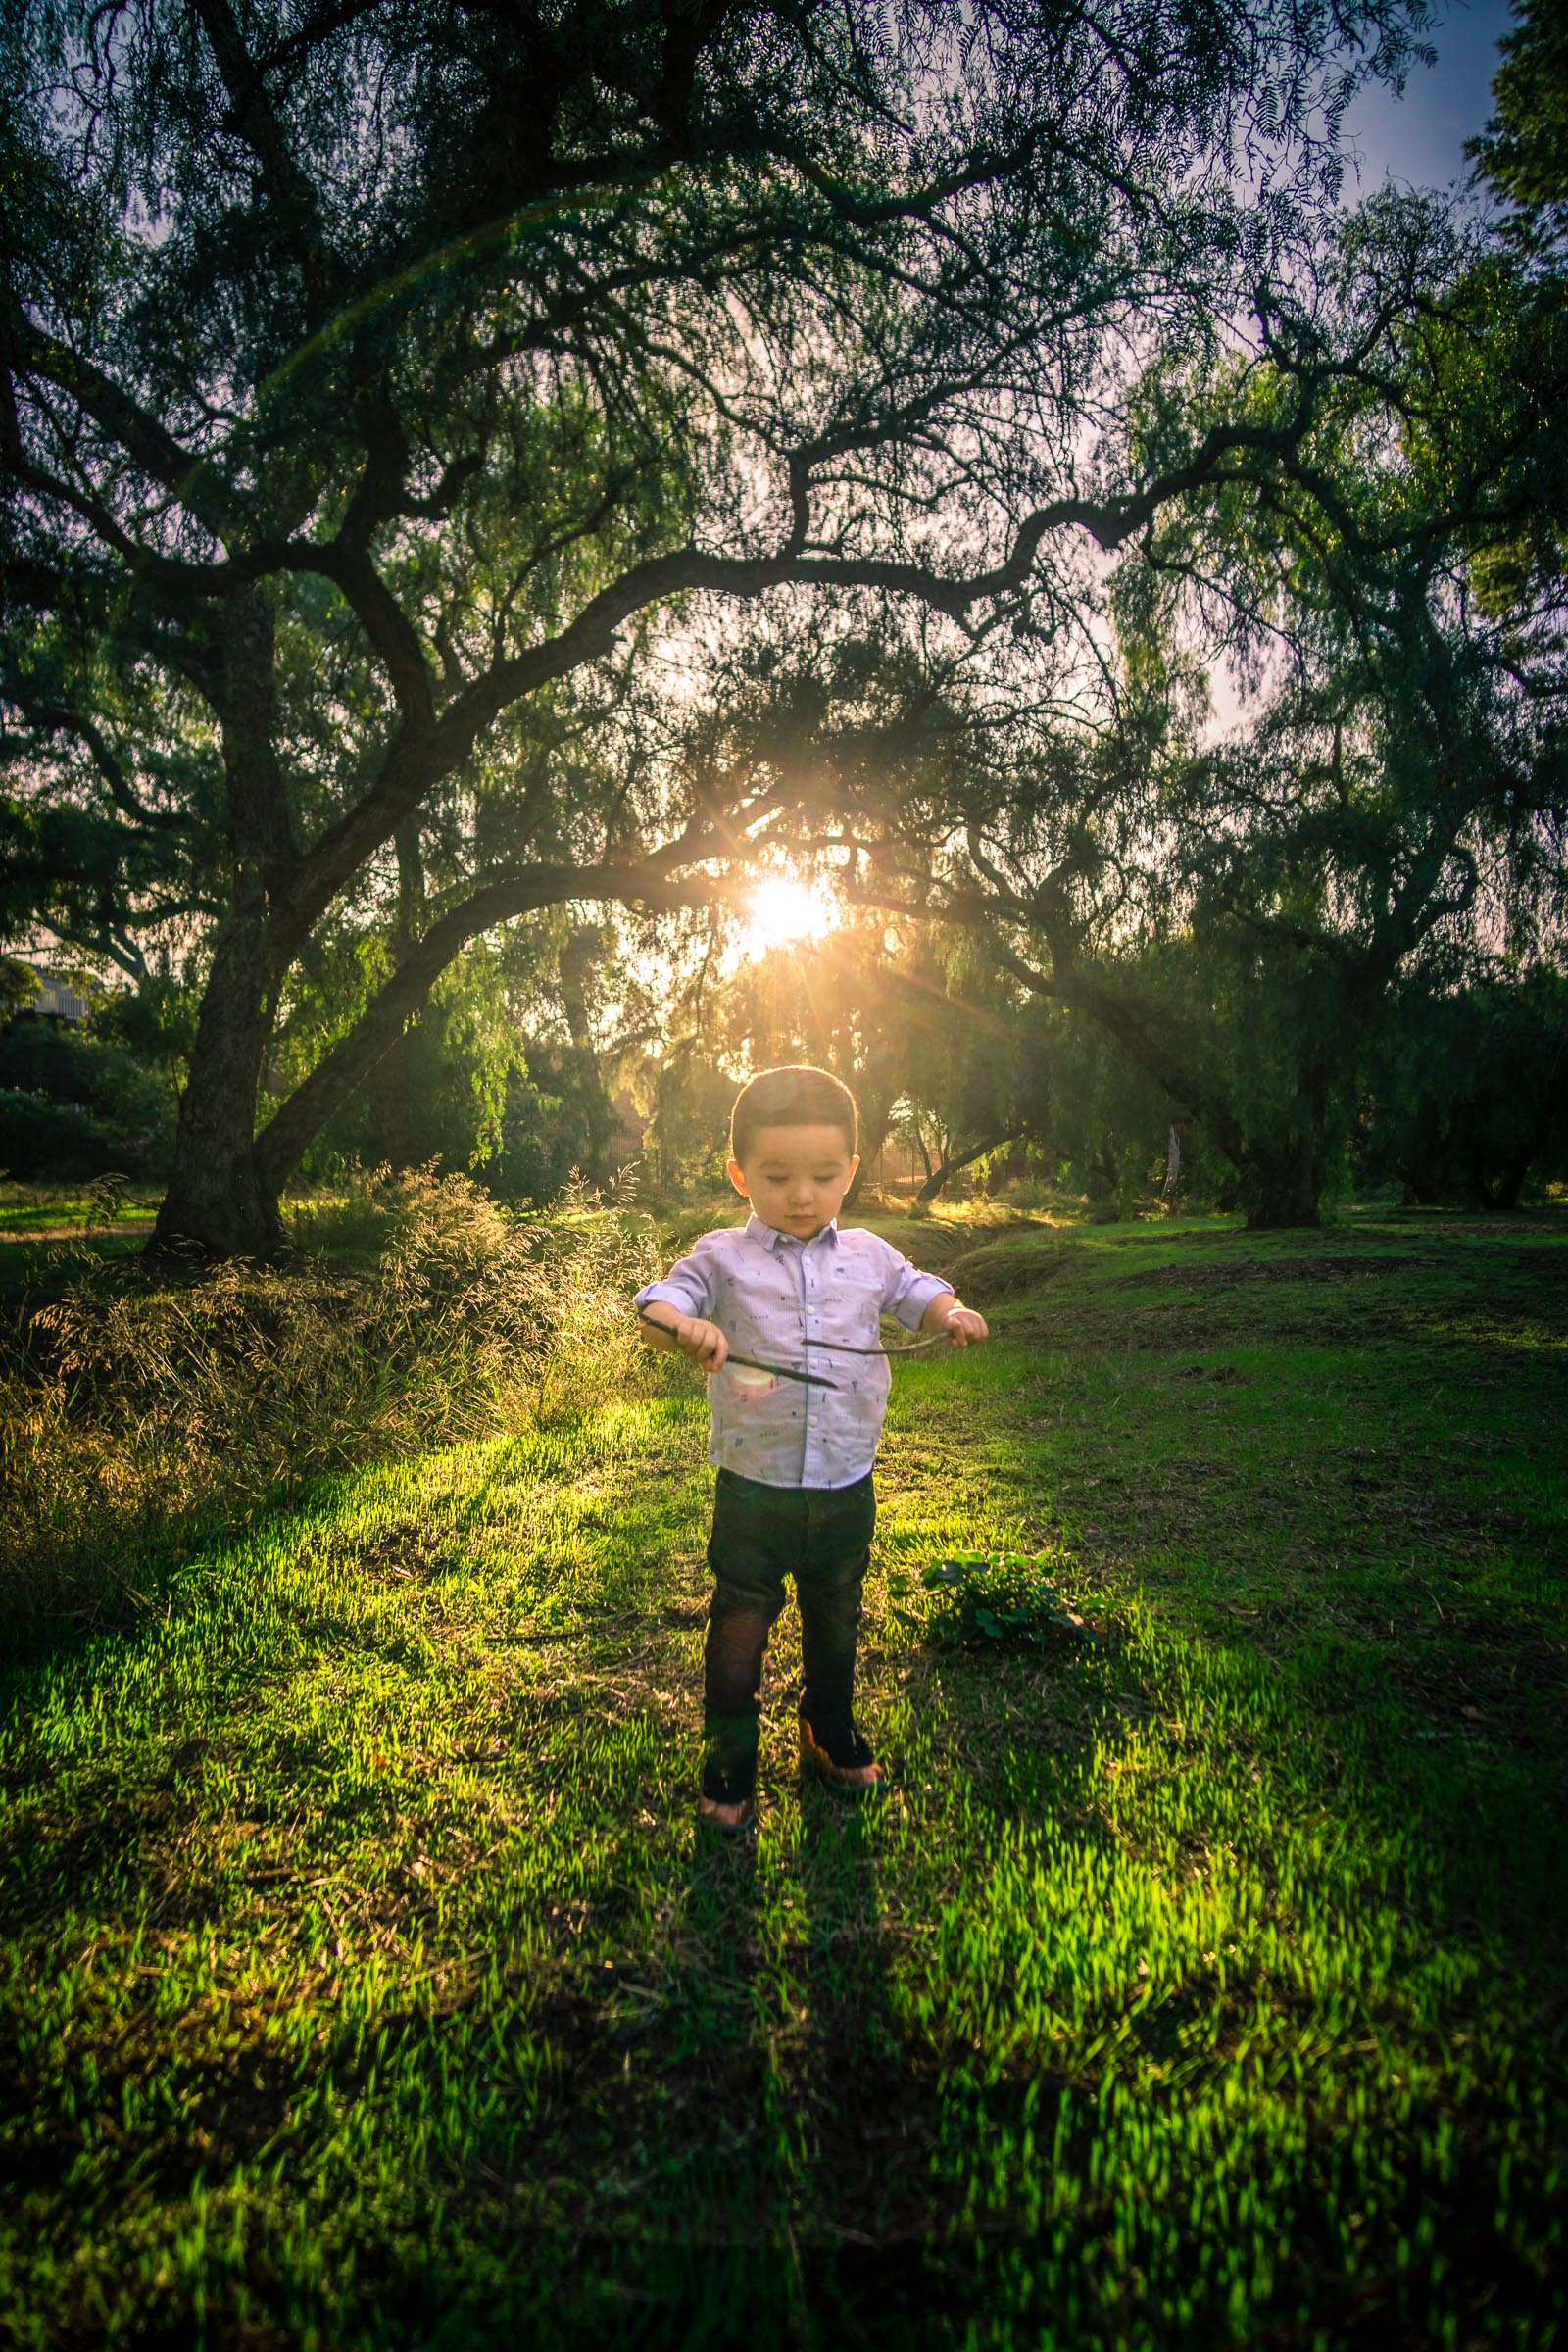 Candid portrait of a little boy playing during a Family portrait photo shoot in Fullerton on the Juanita Cooke Hiking Trail with green trees and grass and the golden hour sun